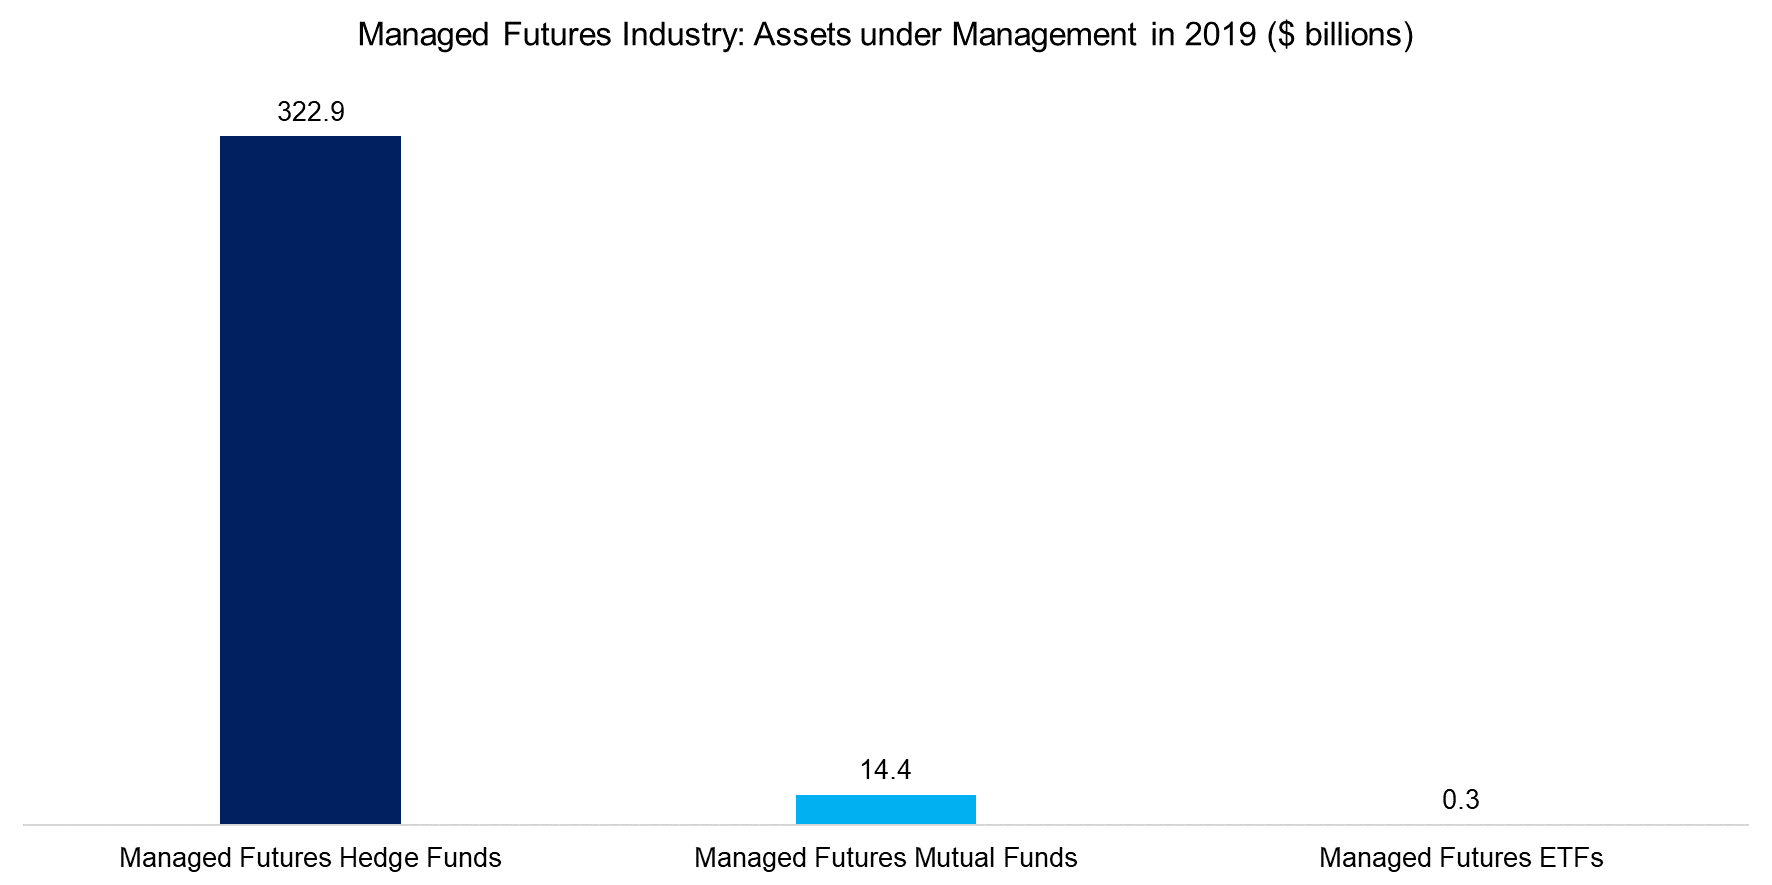 Managed Futures Industry Assets under Management in 2019 ($ billions)